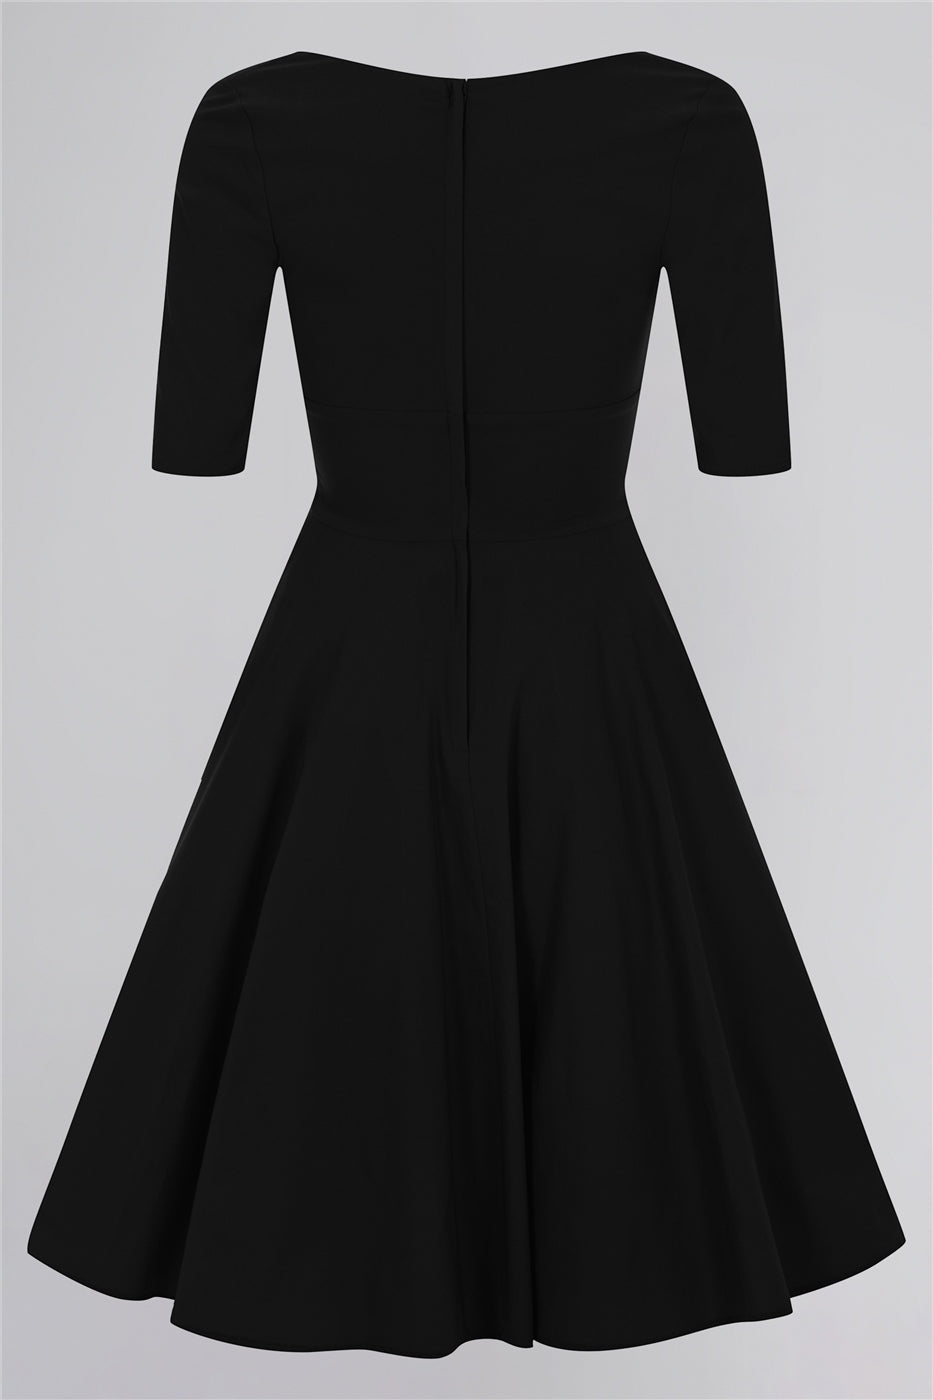 Black Trixie Doll Dress back showing the concealed zipper detail